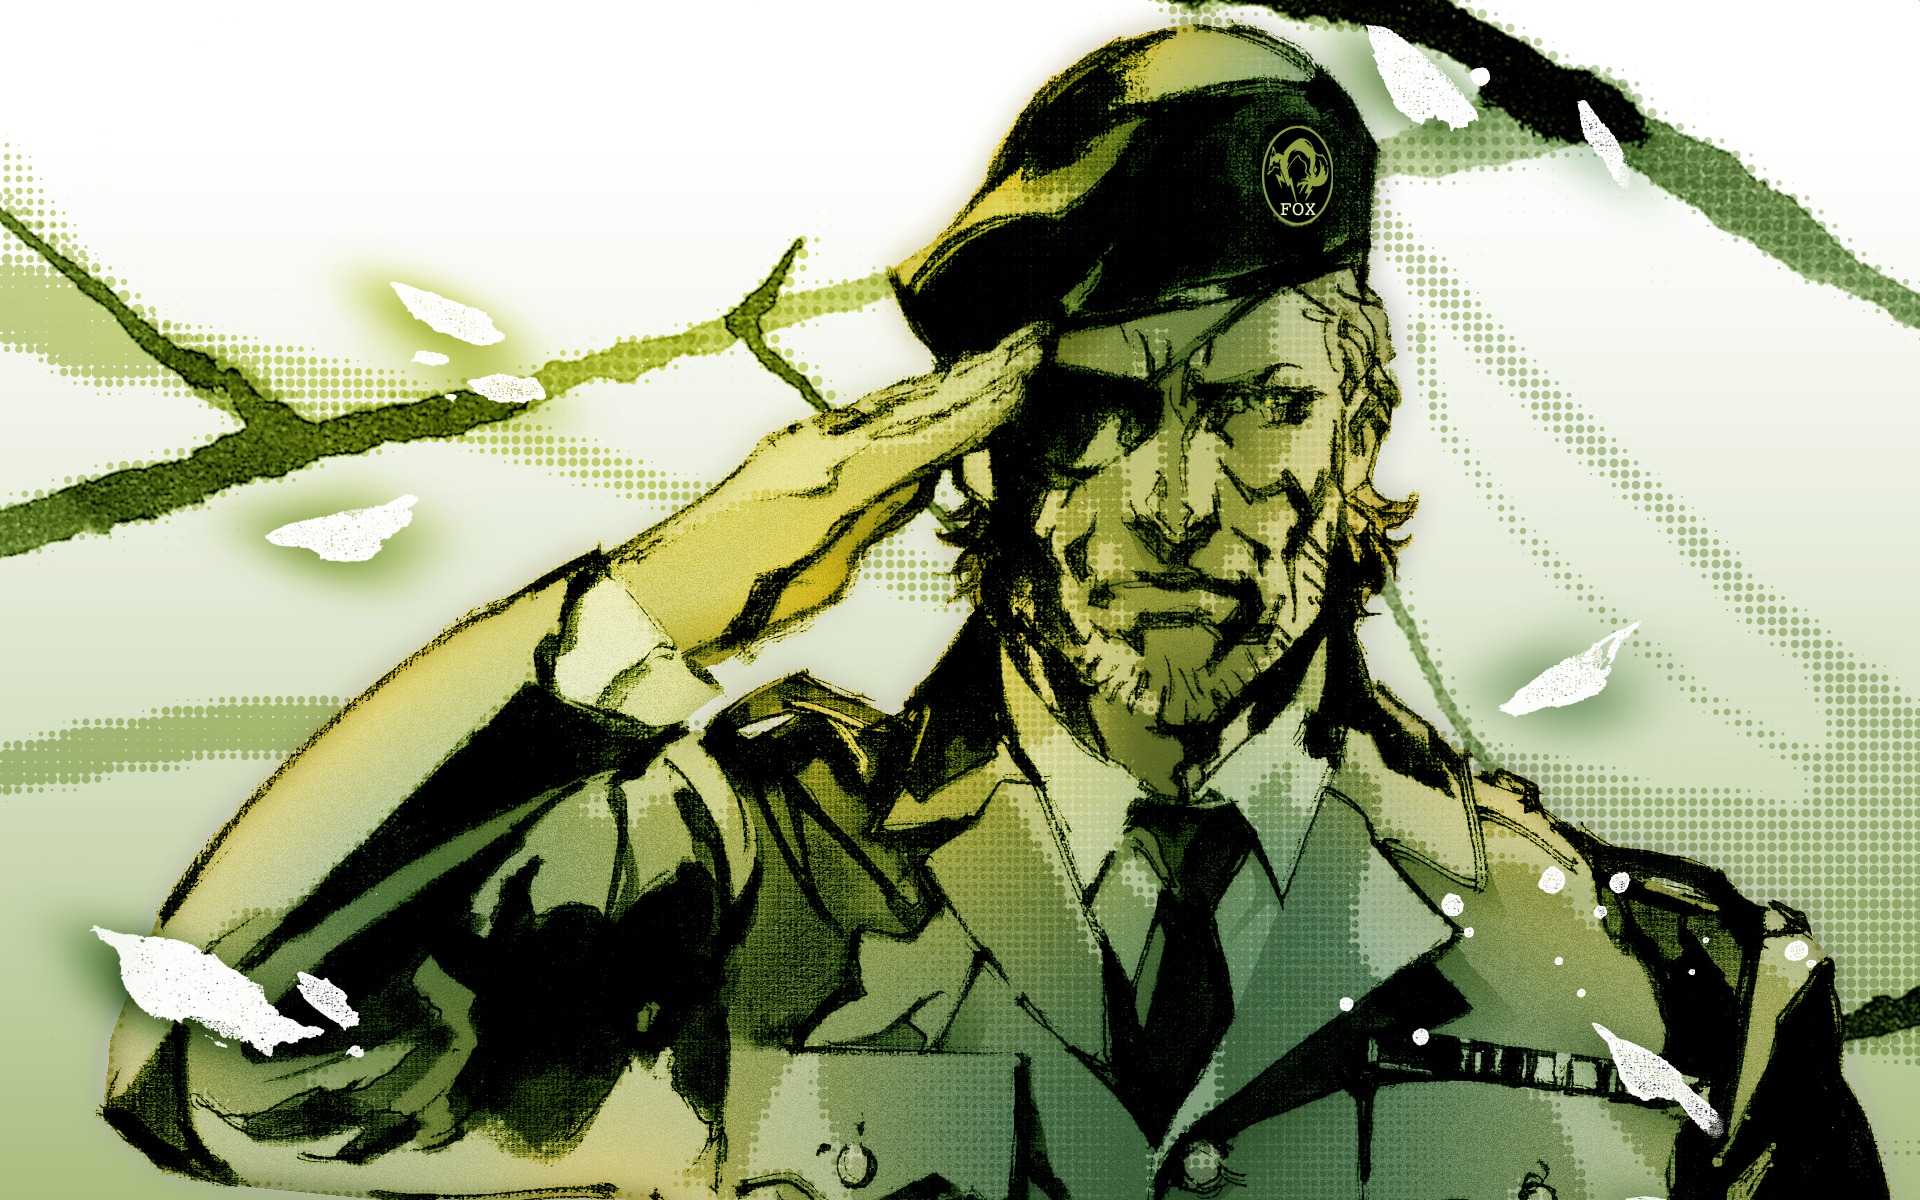 Does anyone have any good metal gear wallpapers : metalgearsolid